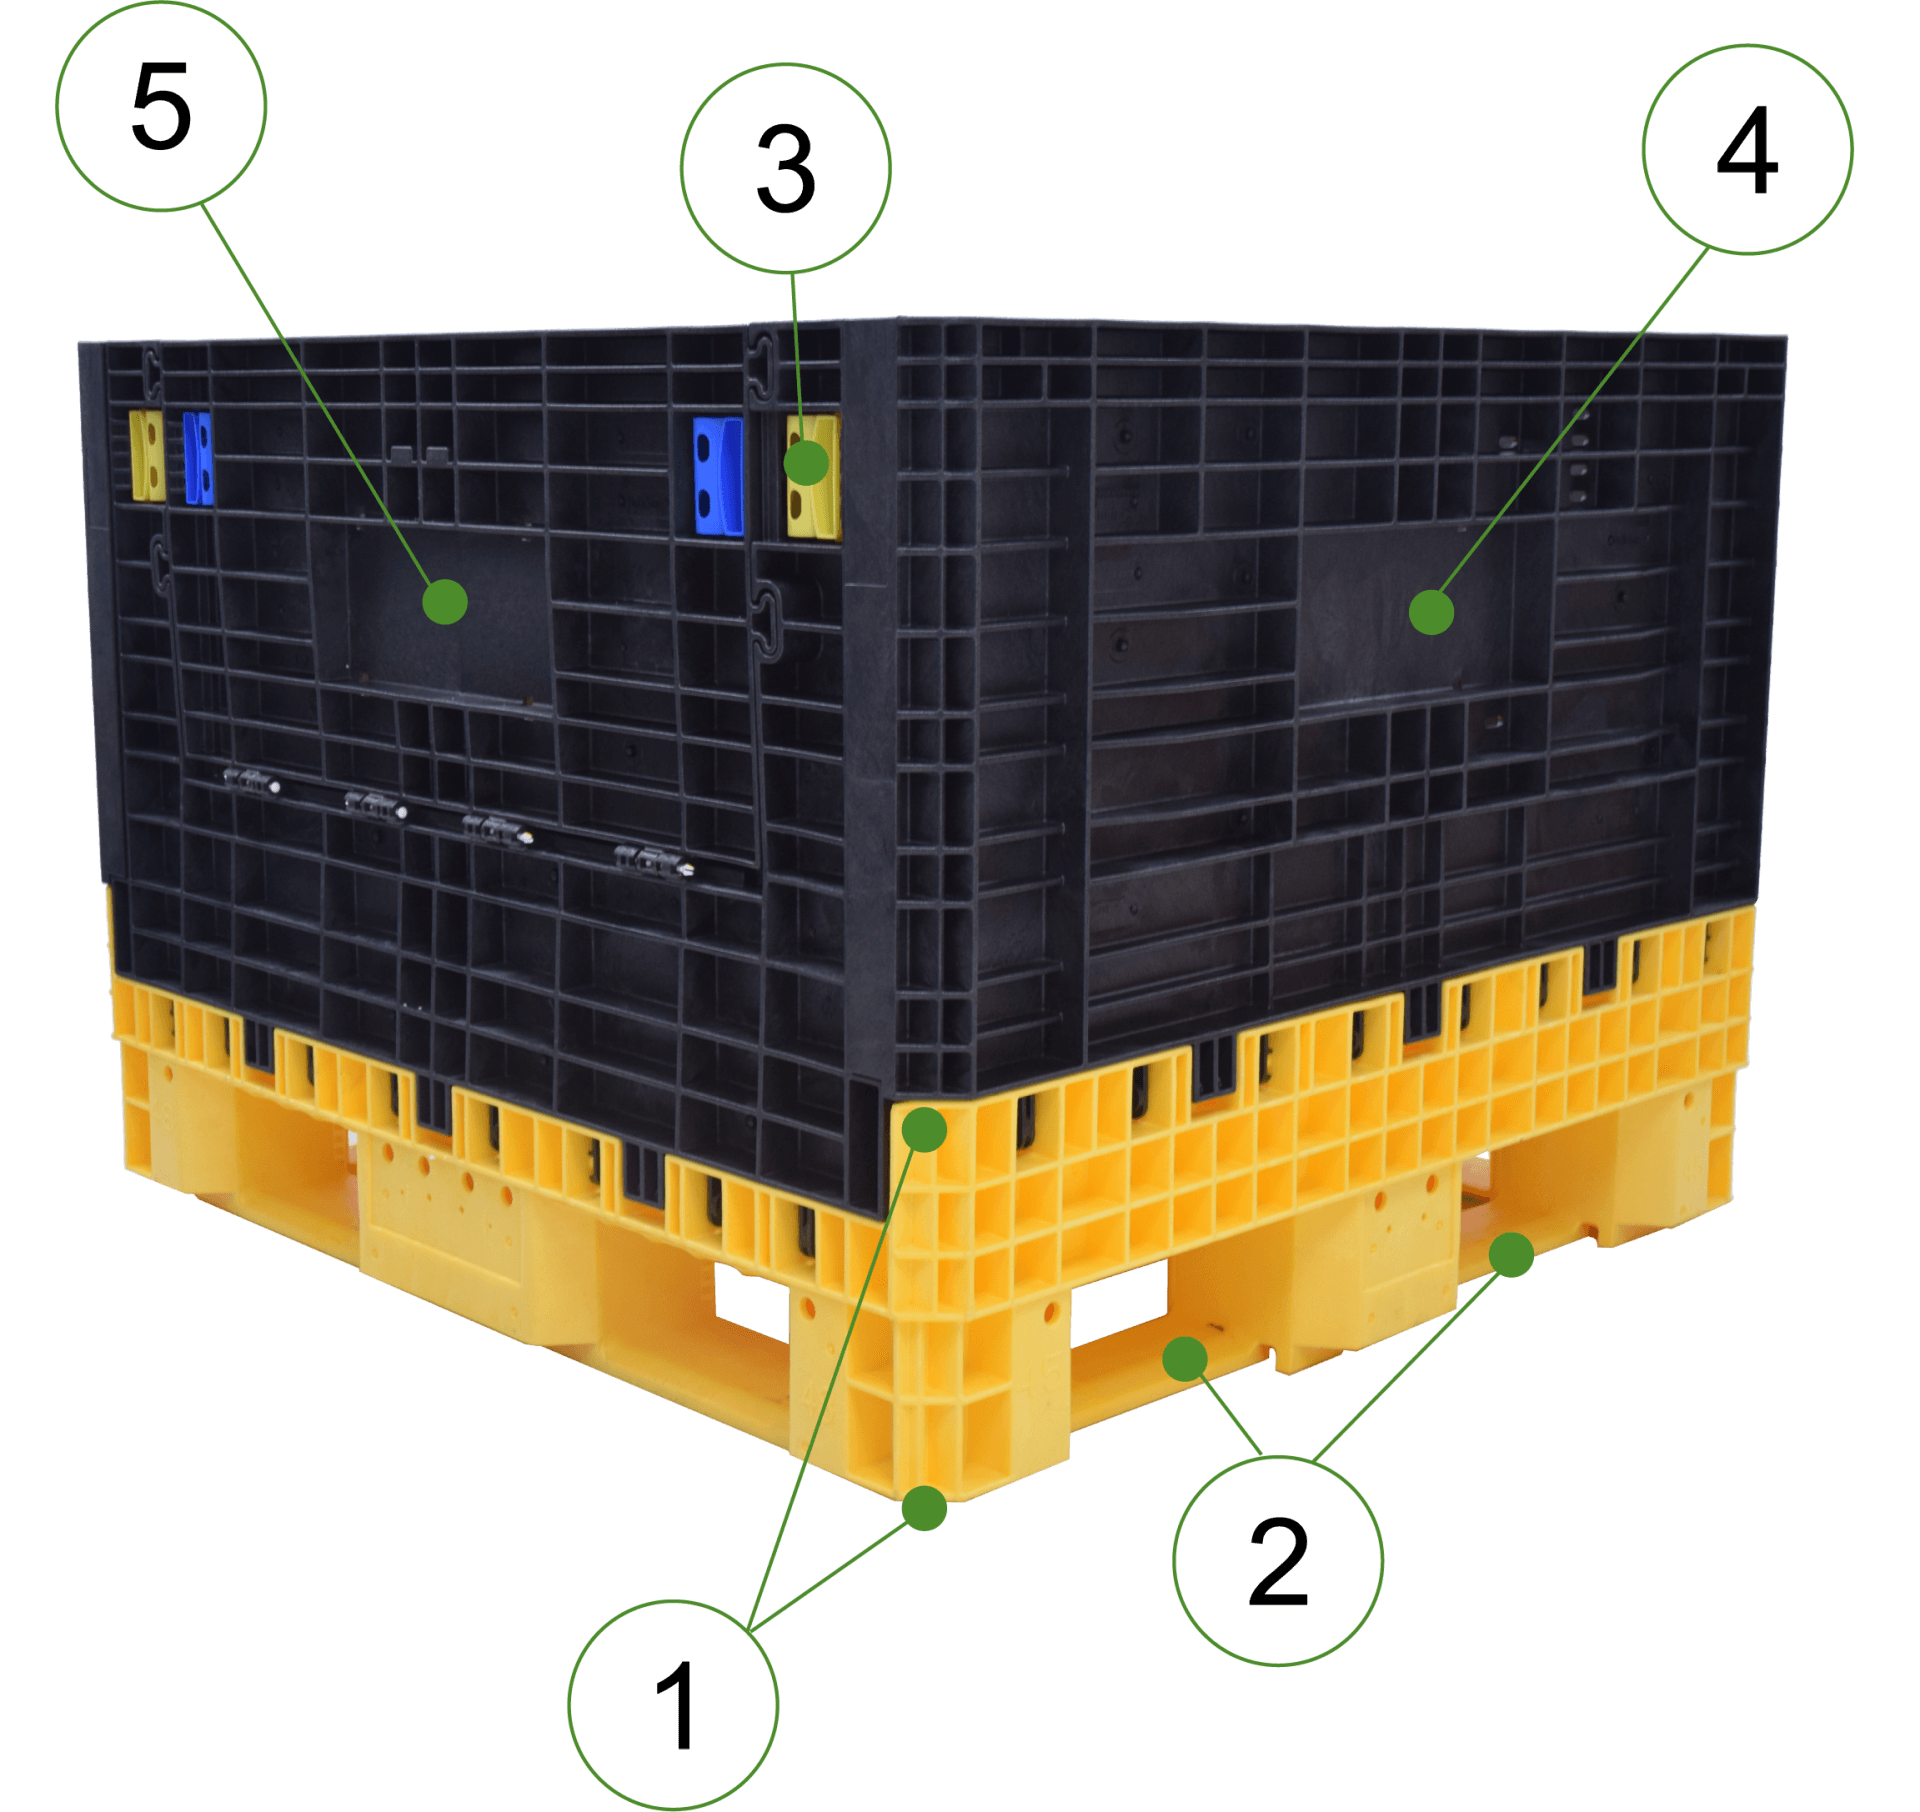 Inspection points for bulk containers